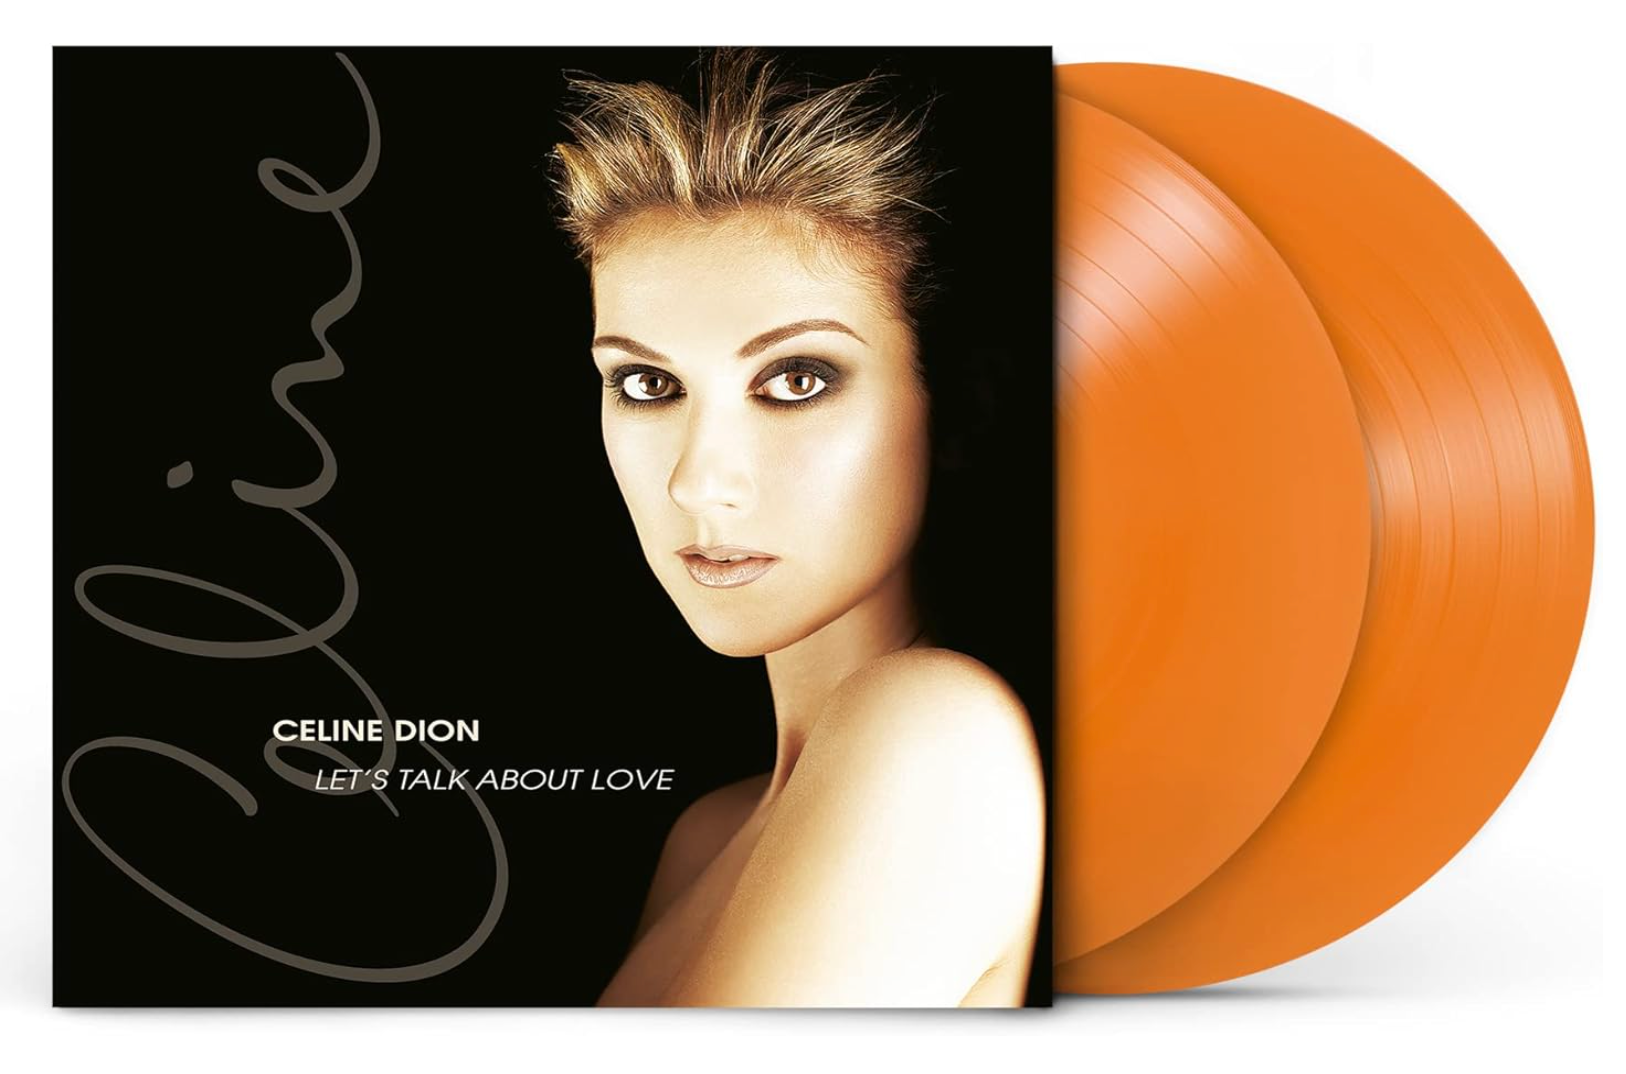 CELINE DION /Let's Talk About Love (inc. My Heart Will Go On) Orange 2LP